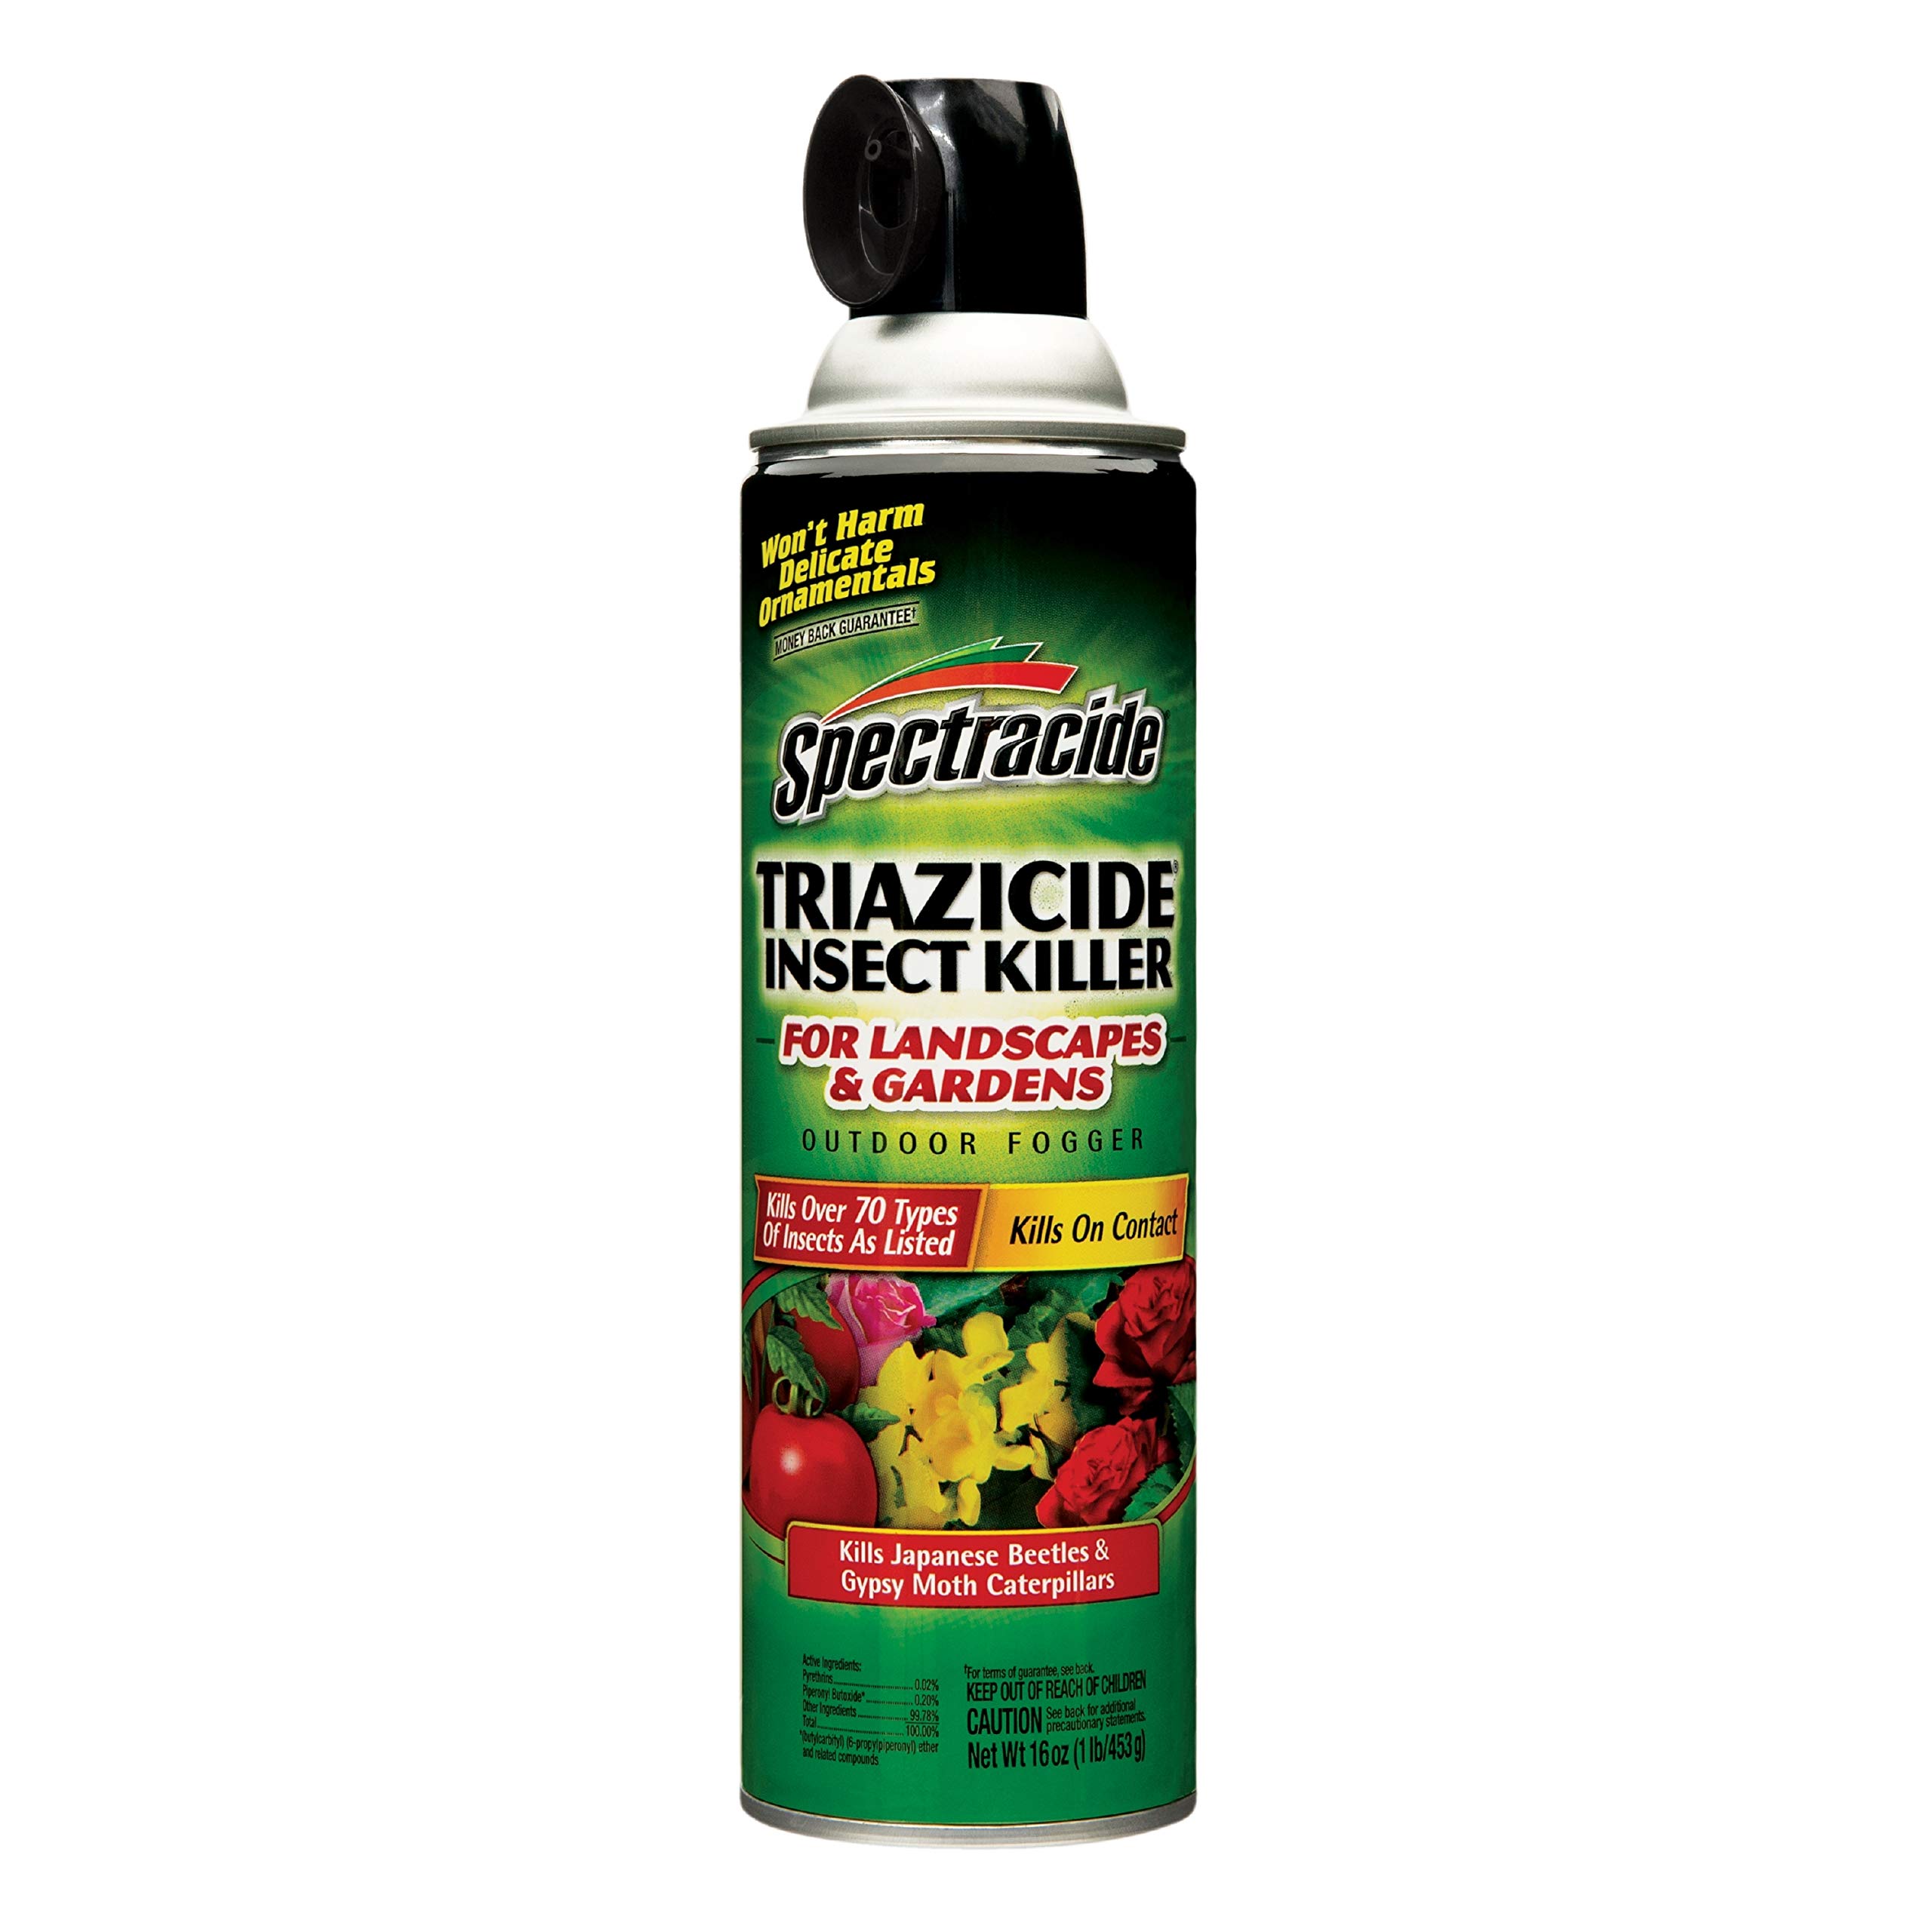 16-Ounce Spectracide Triazicide Insect Killer for Landscapes & Gardens $1.52 + Free Shipping w/ Prime or on $35+